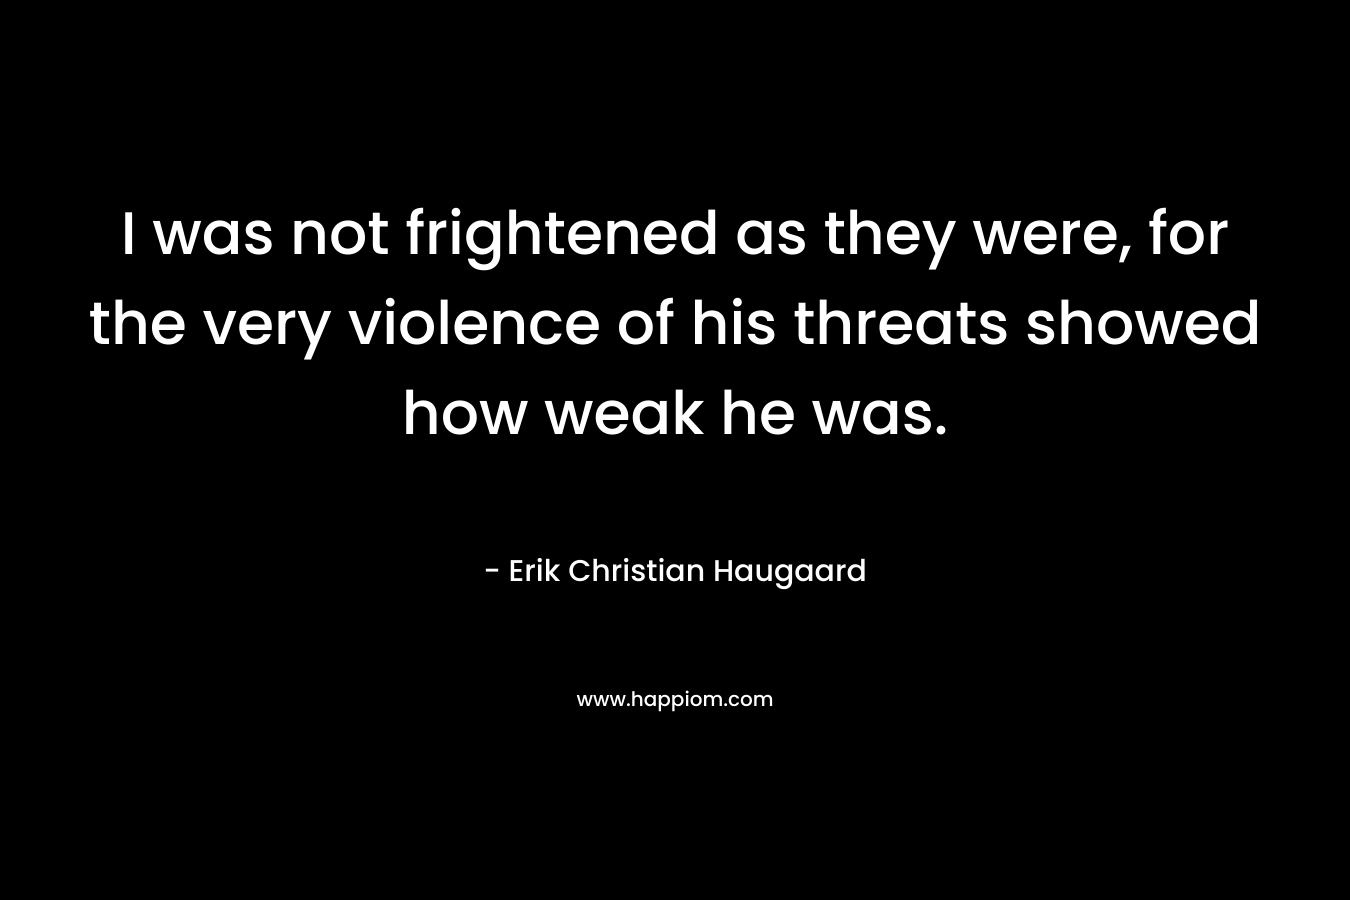 I was not frightened as they were, for the very violence of his threats showed how weak he was.